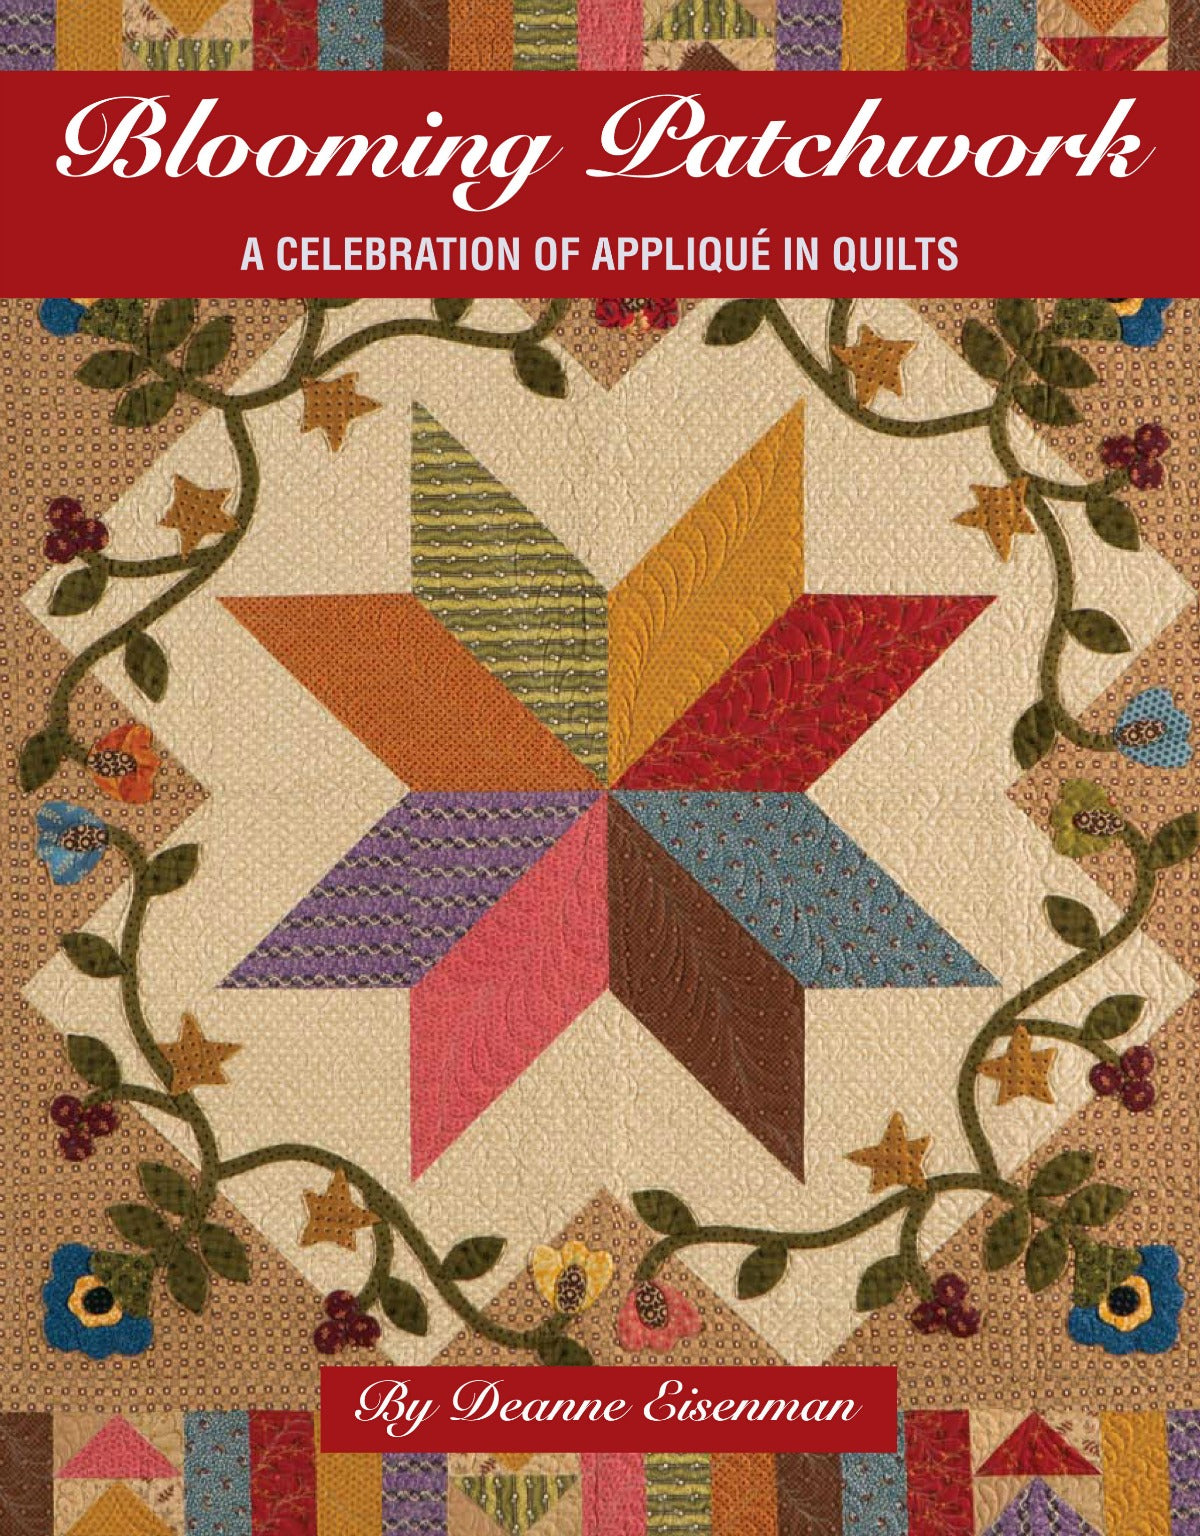 Book of scrap quilt patterns with applique and brief history of applique